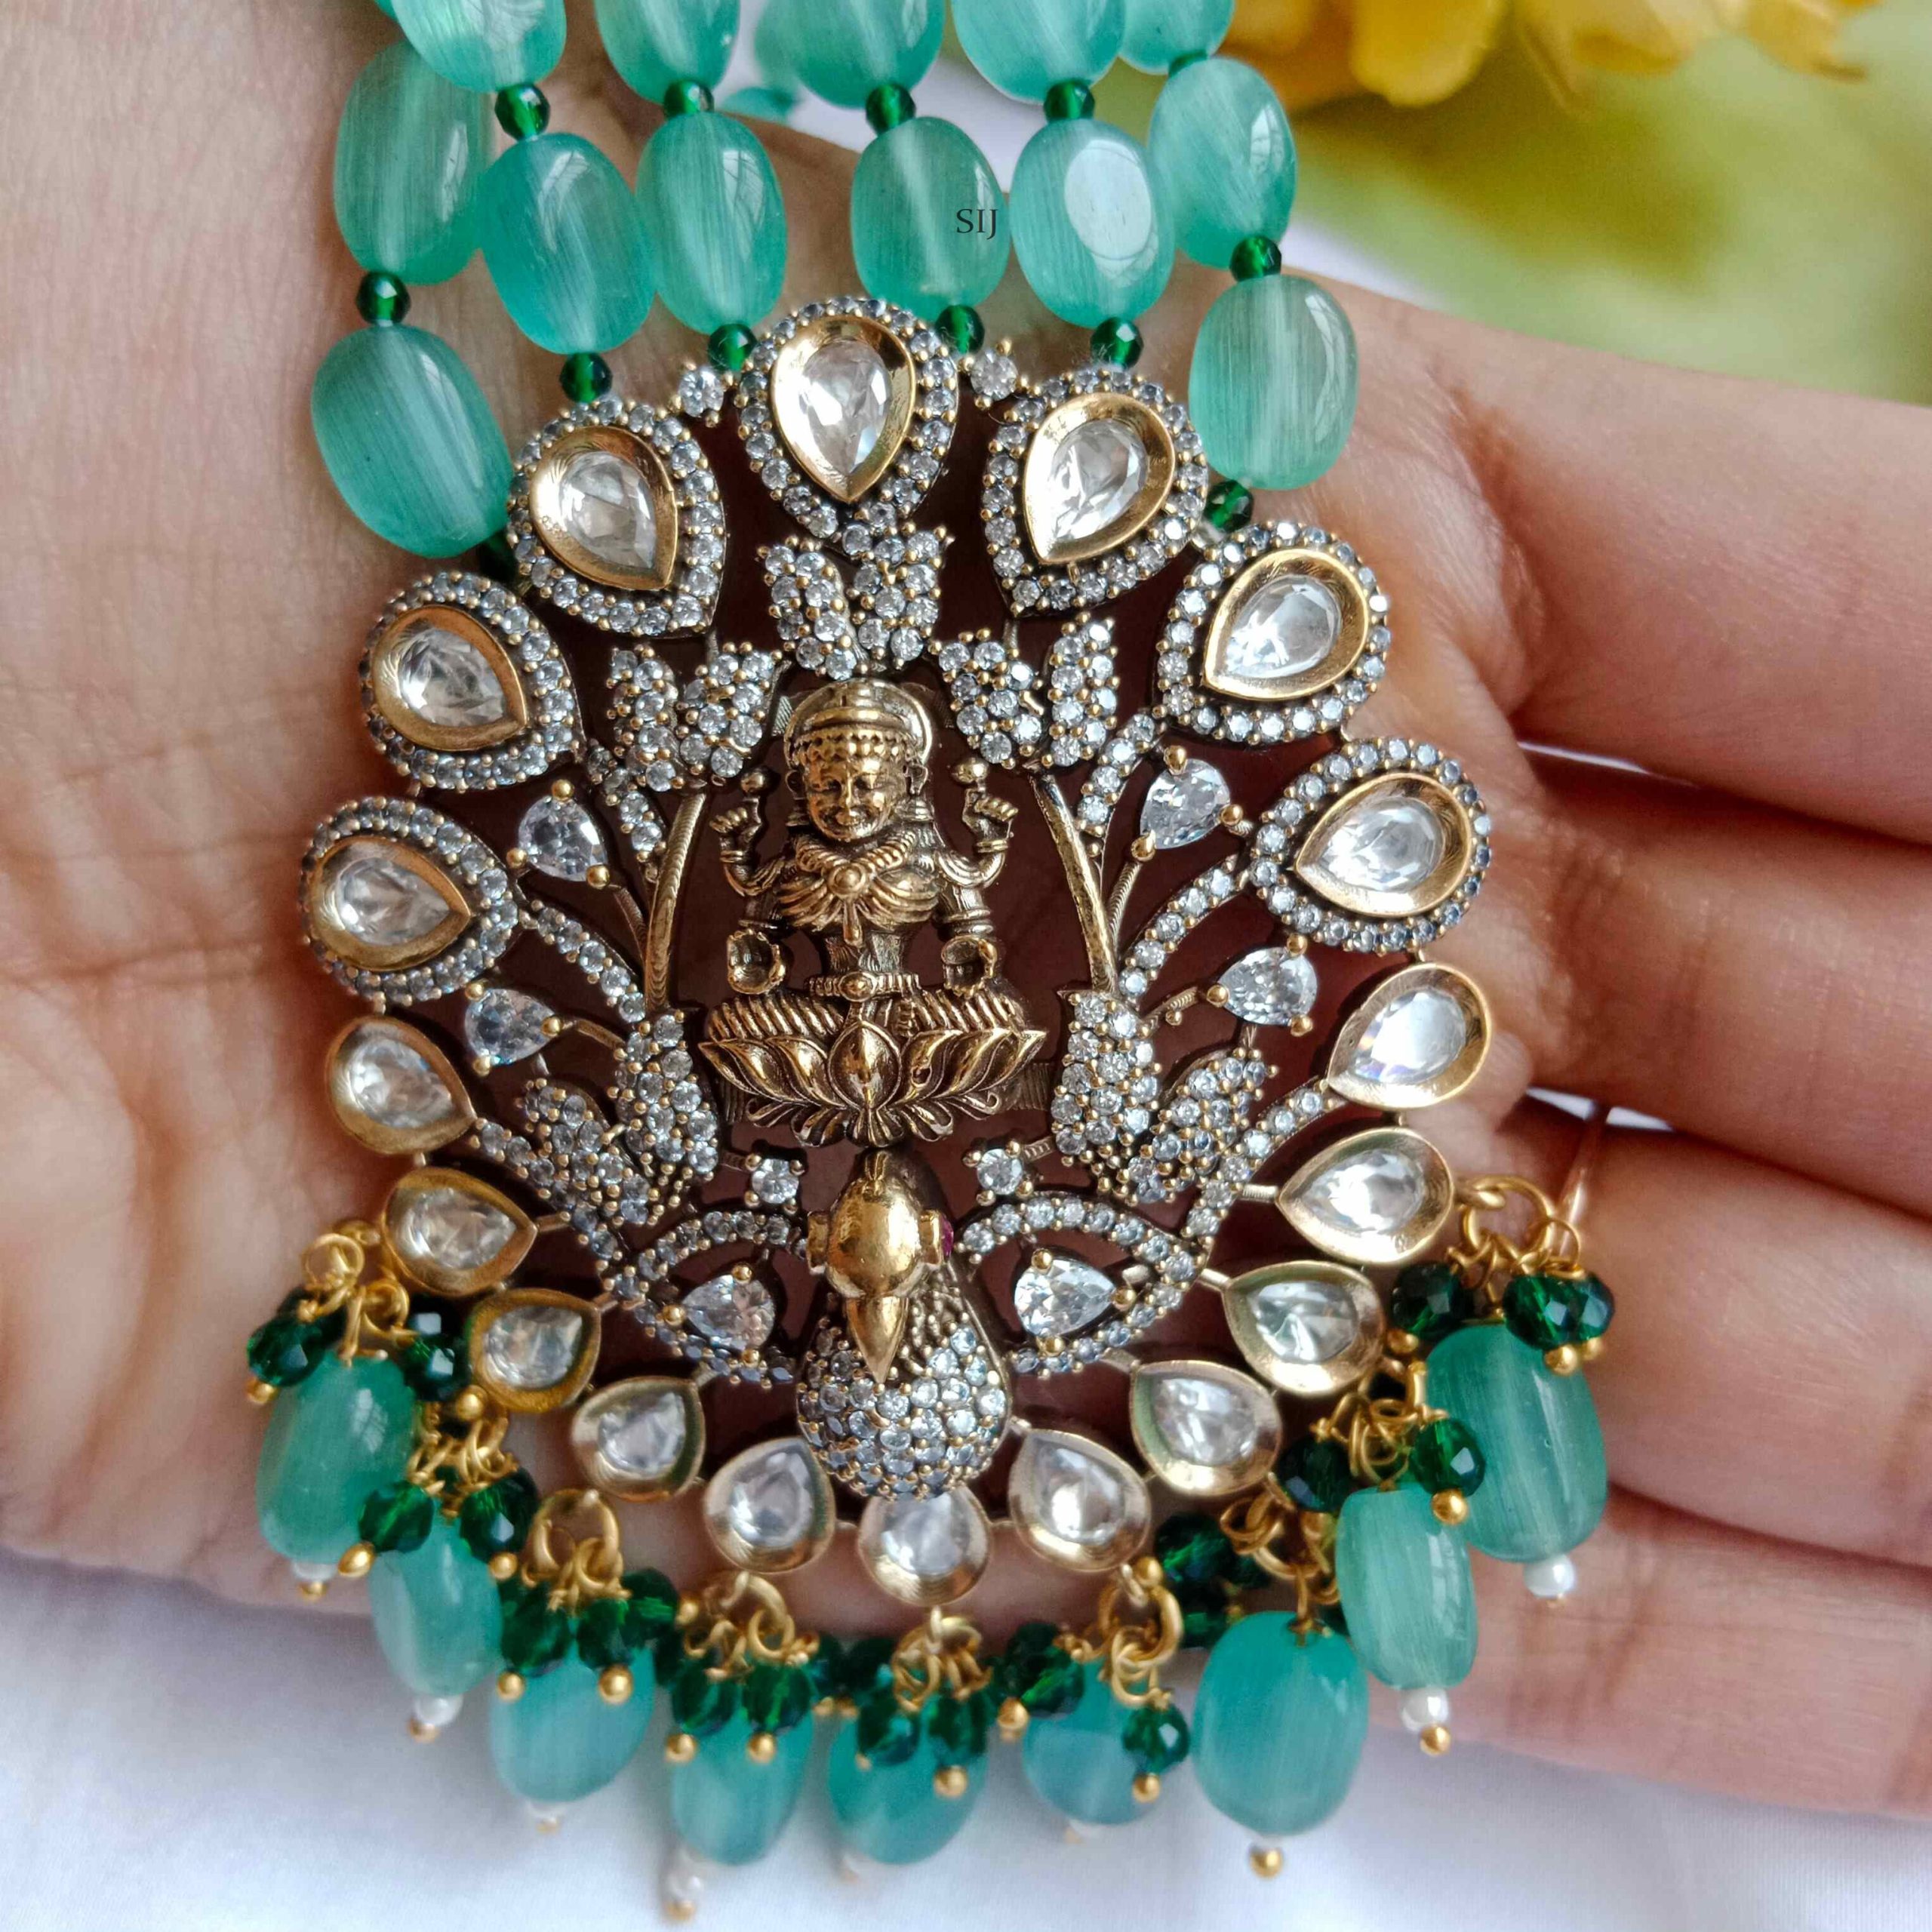 Traditional Lakshmi Victorian Pendant with Green Beads Haram